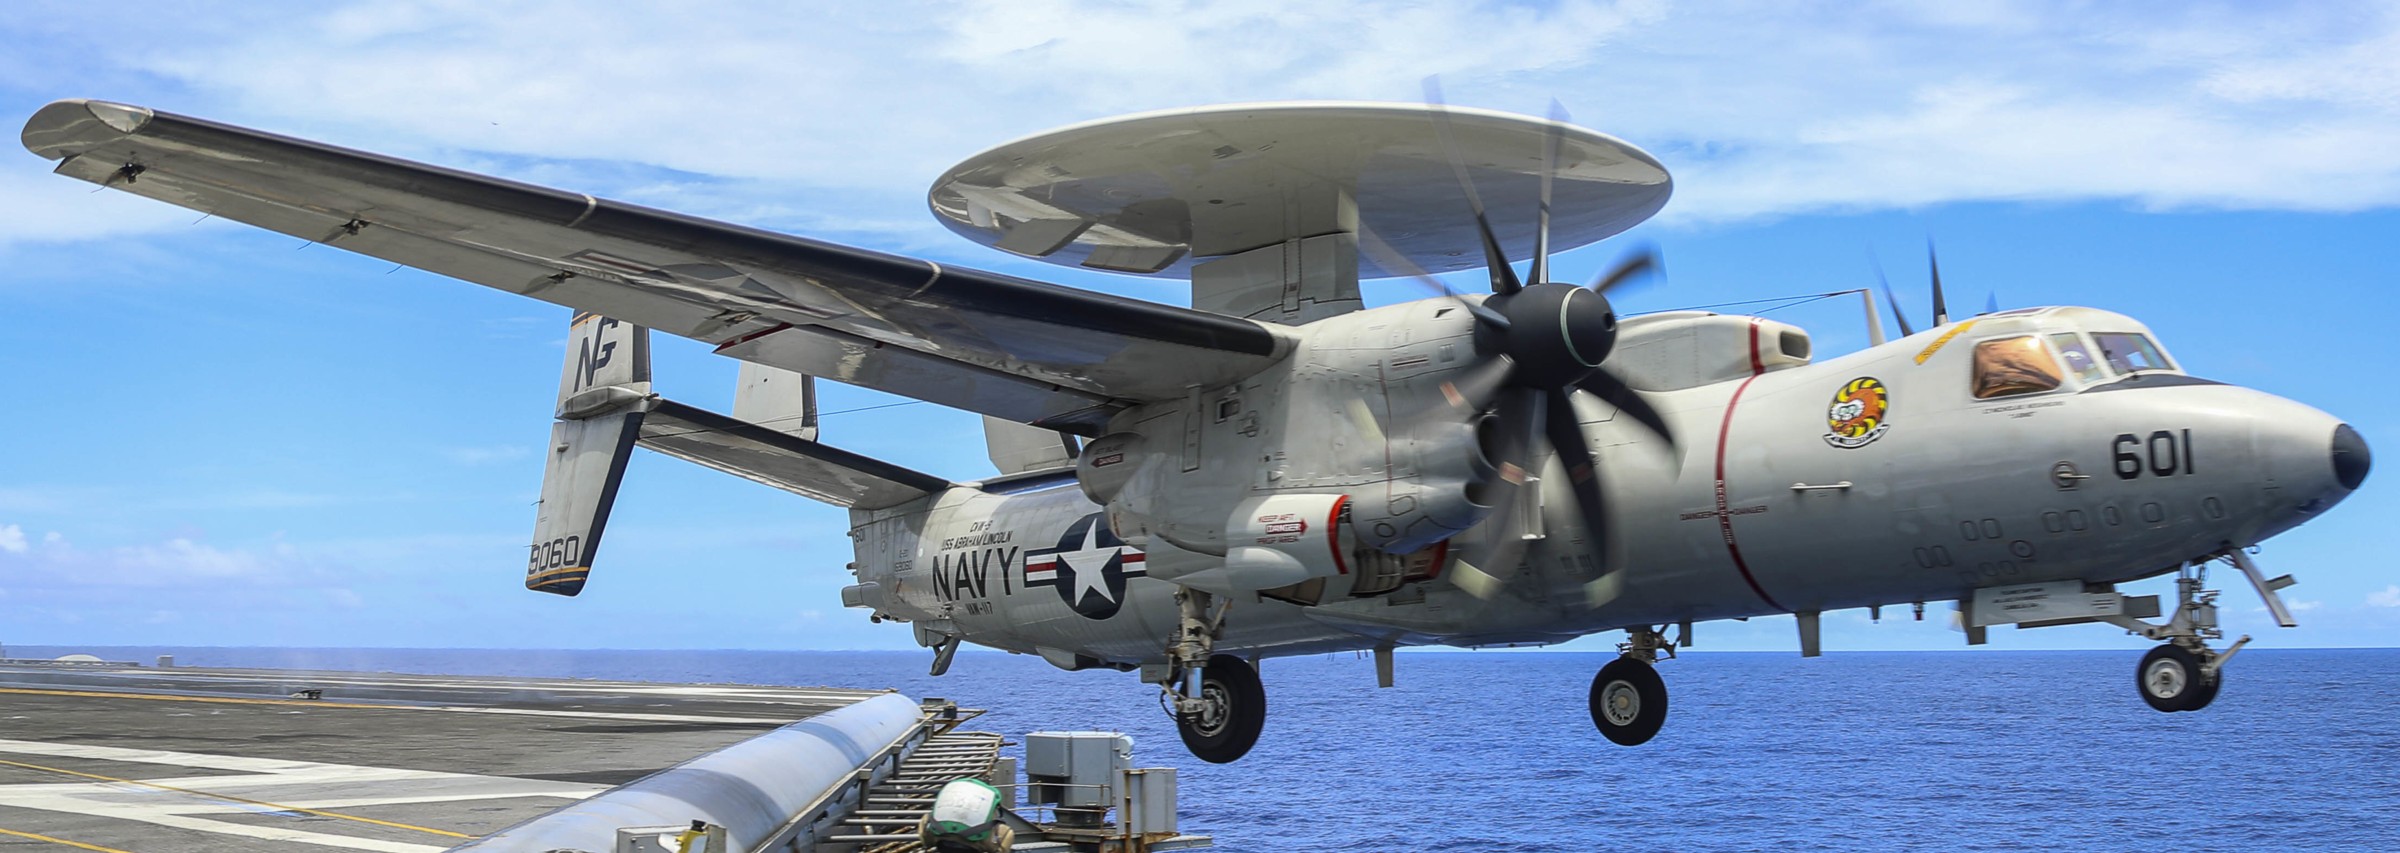 vaw-117 wallbangers airborne command and control squadron navy e-2d hawkeye cvw-9 uss abraham lincoln cvn-72 11